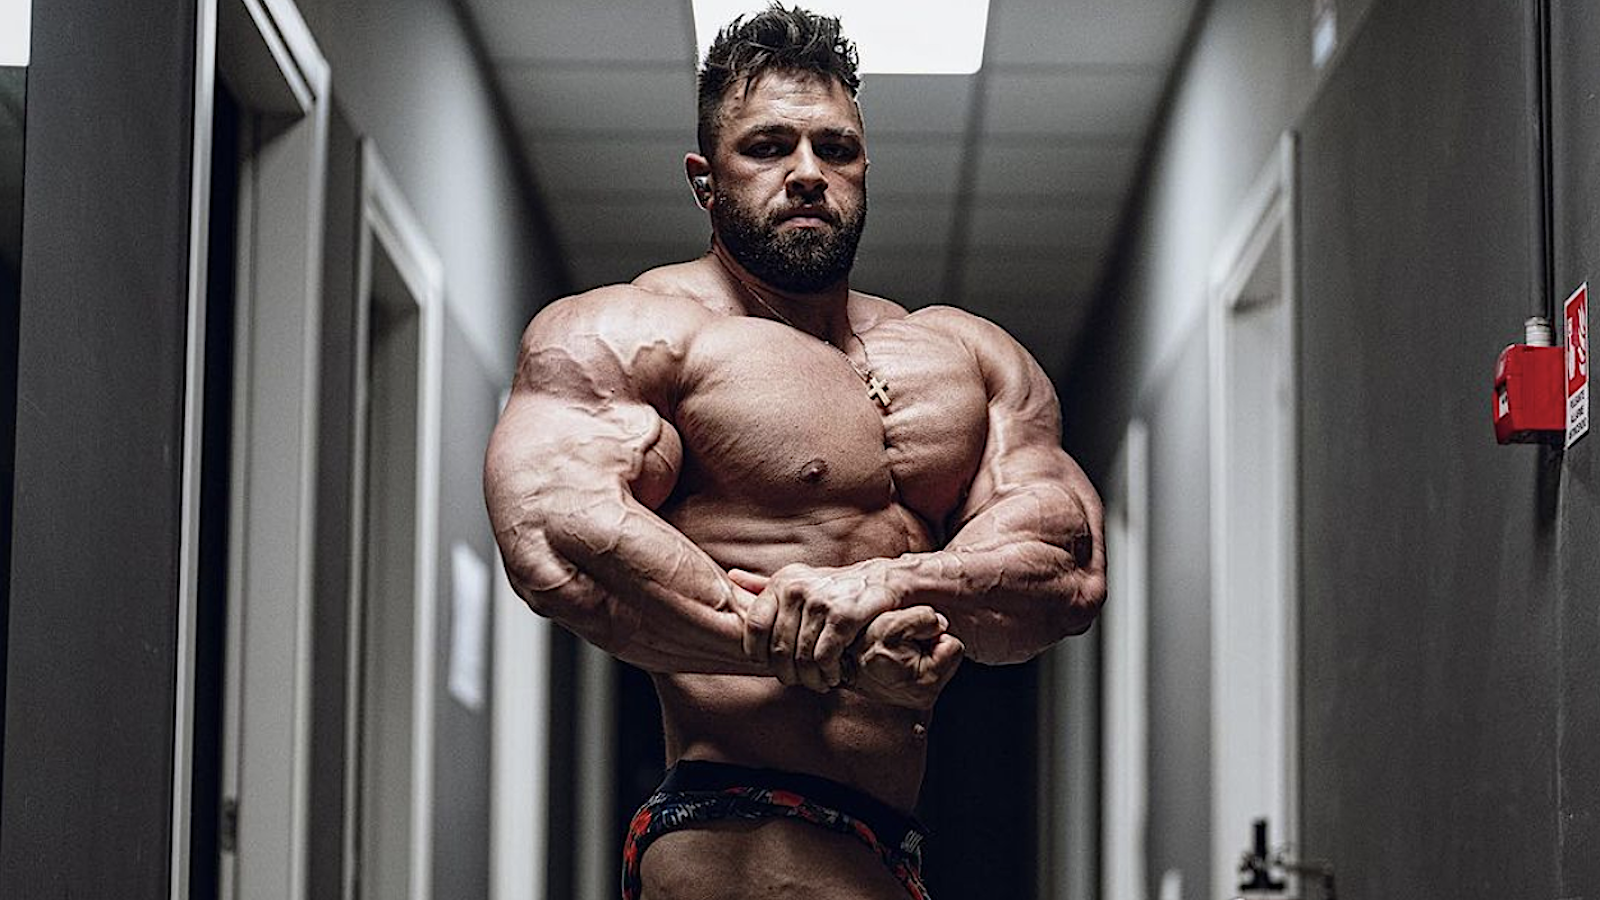 Regan Grimes Full Day of Eating 22 Days Out From the 2023 Mr. Olympia